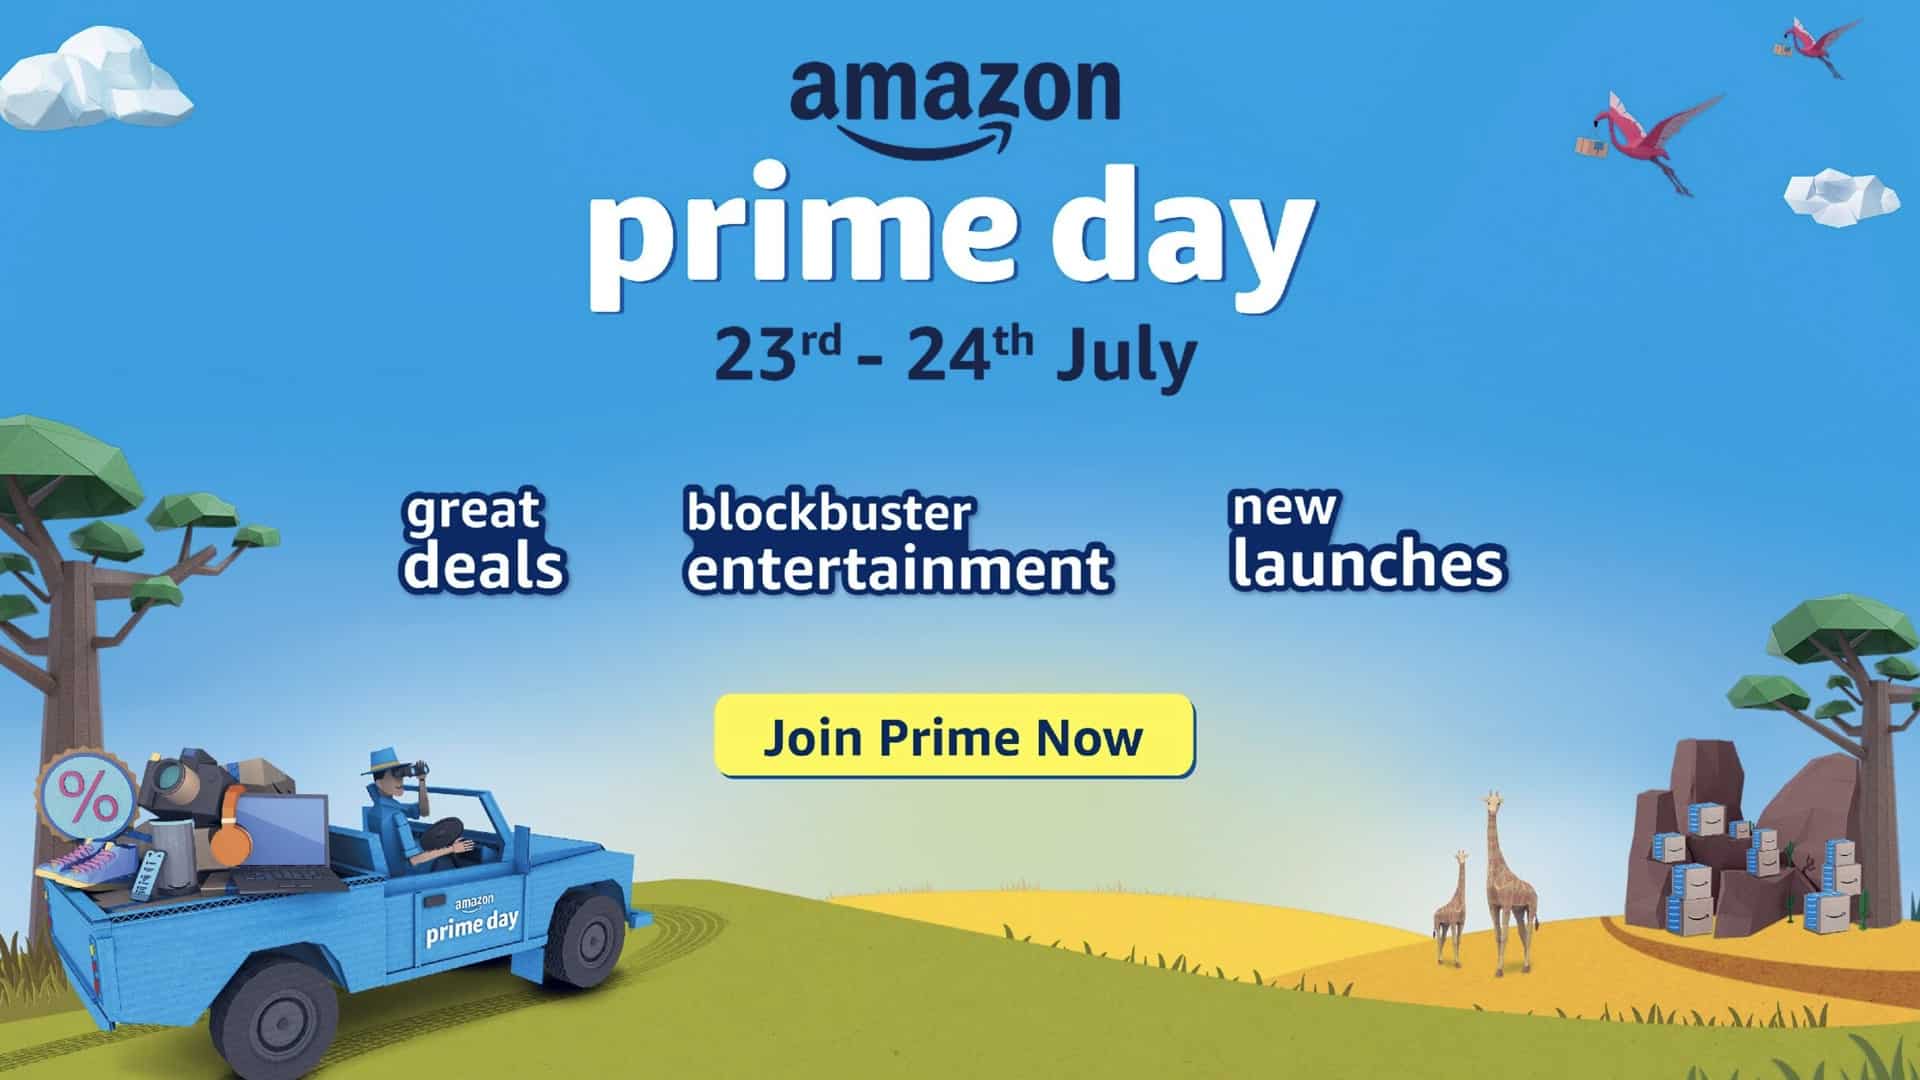 Amazon India to host Prime Day sales on July 23-24